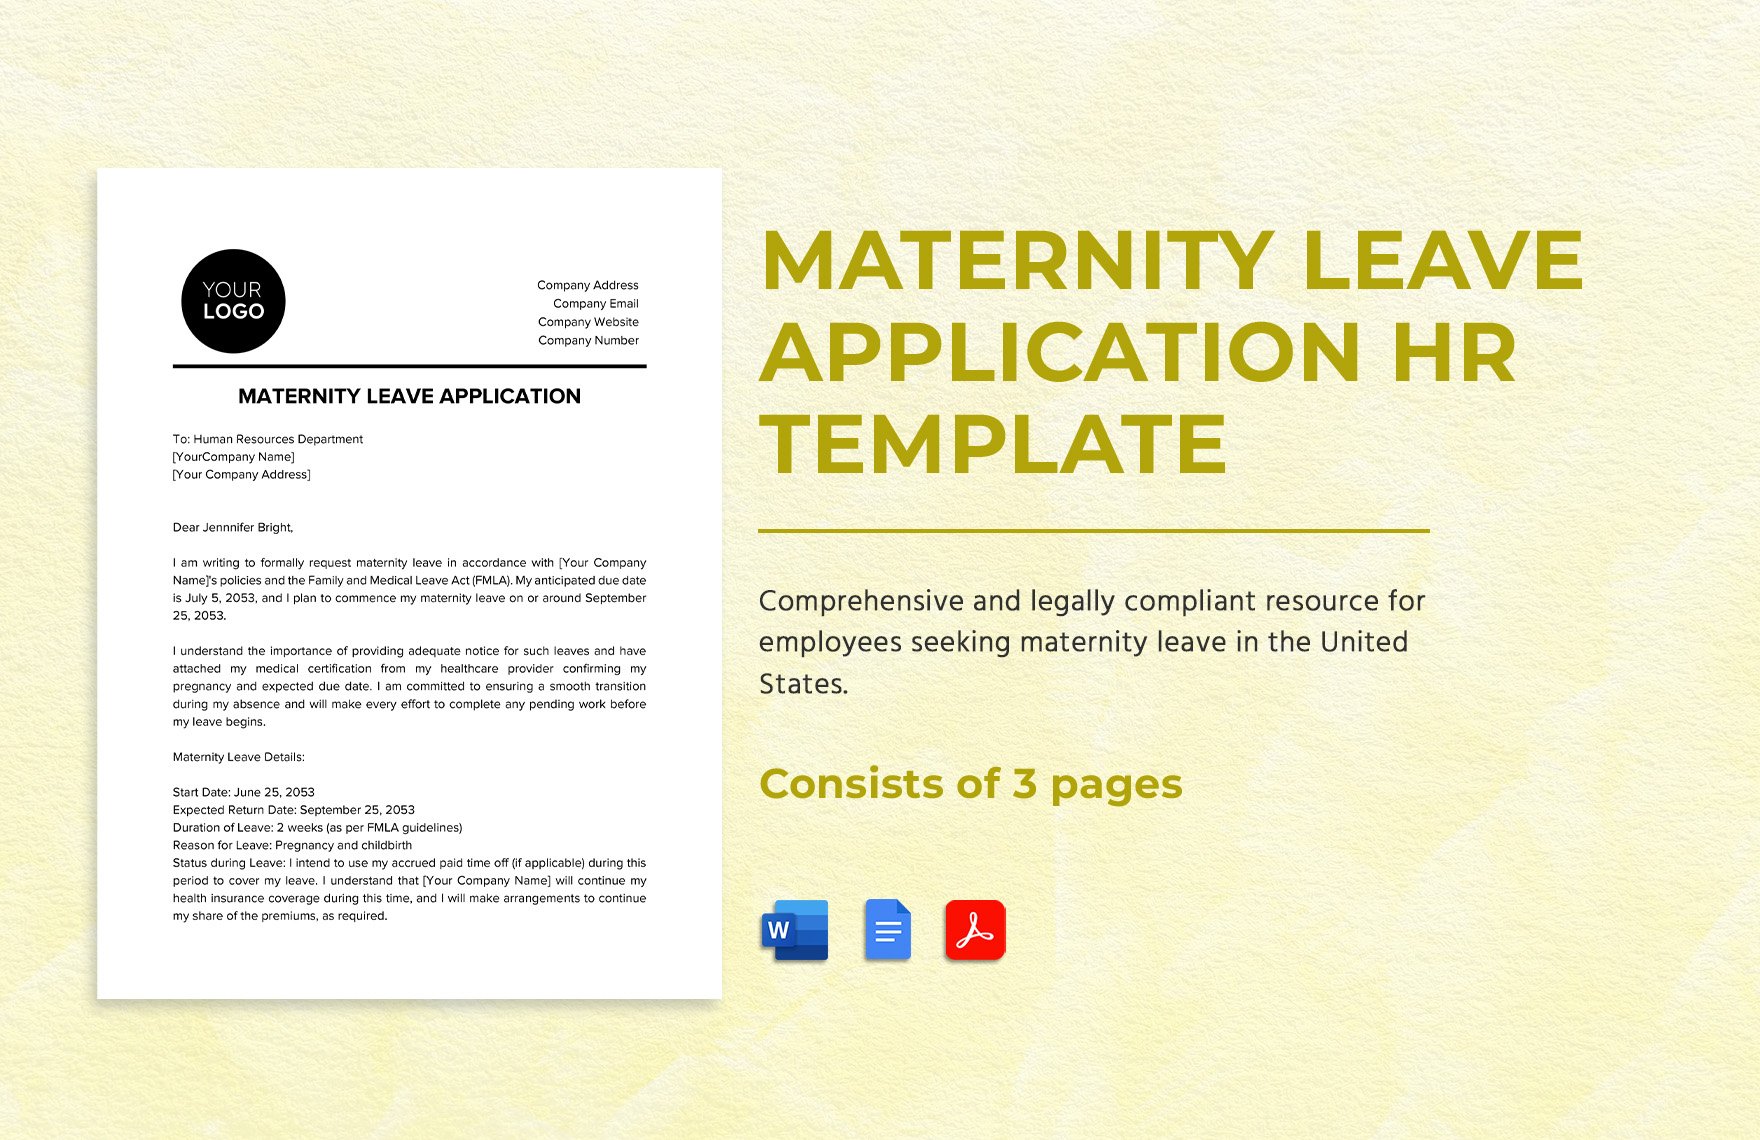 Maternity Leave Application HR Template in Word, Google Docs, PDF